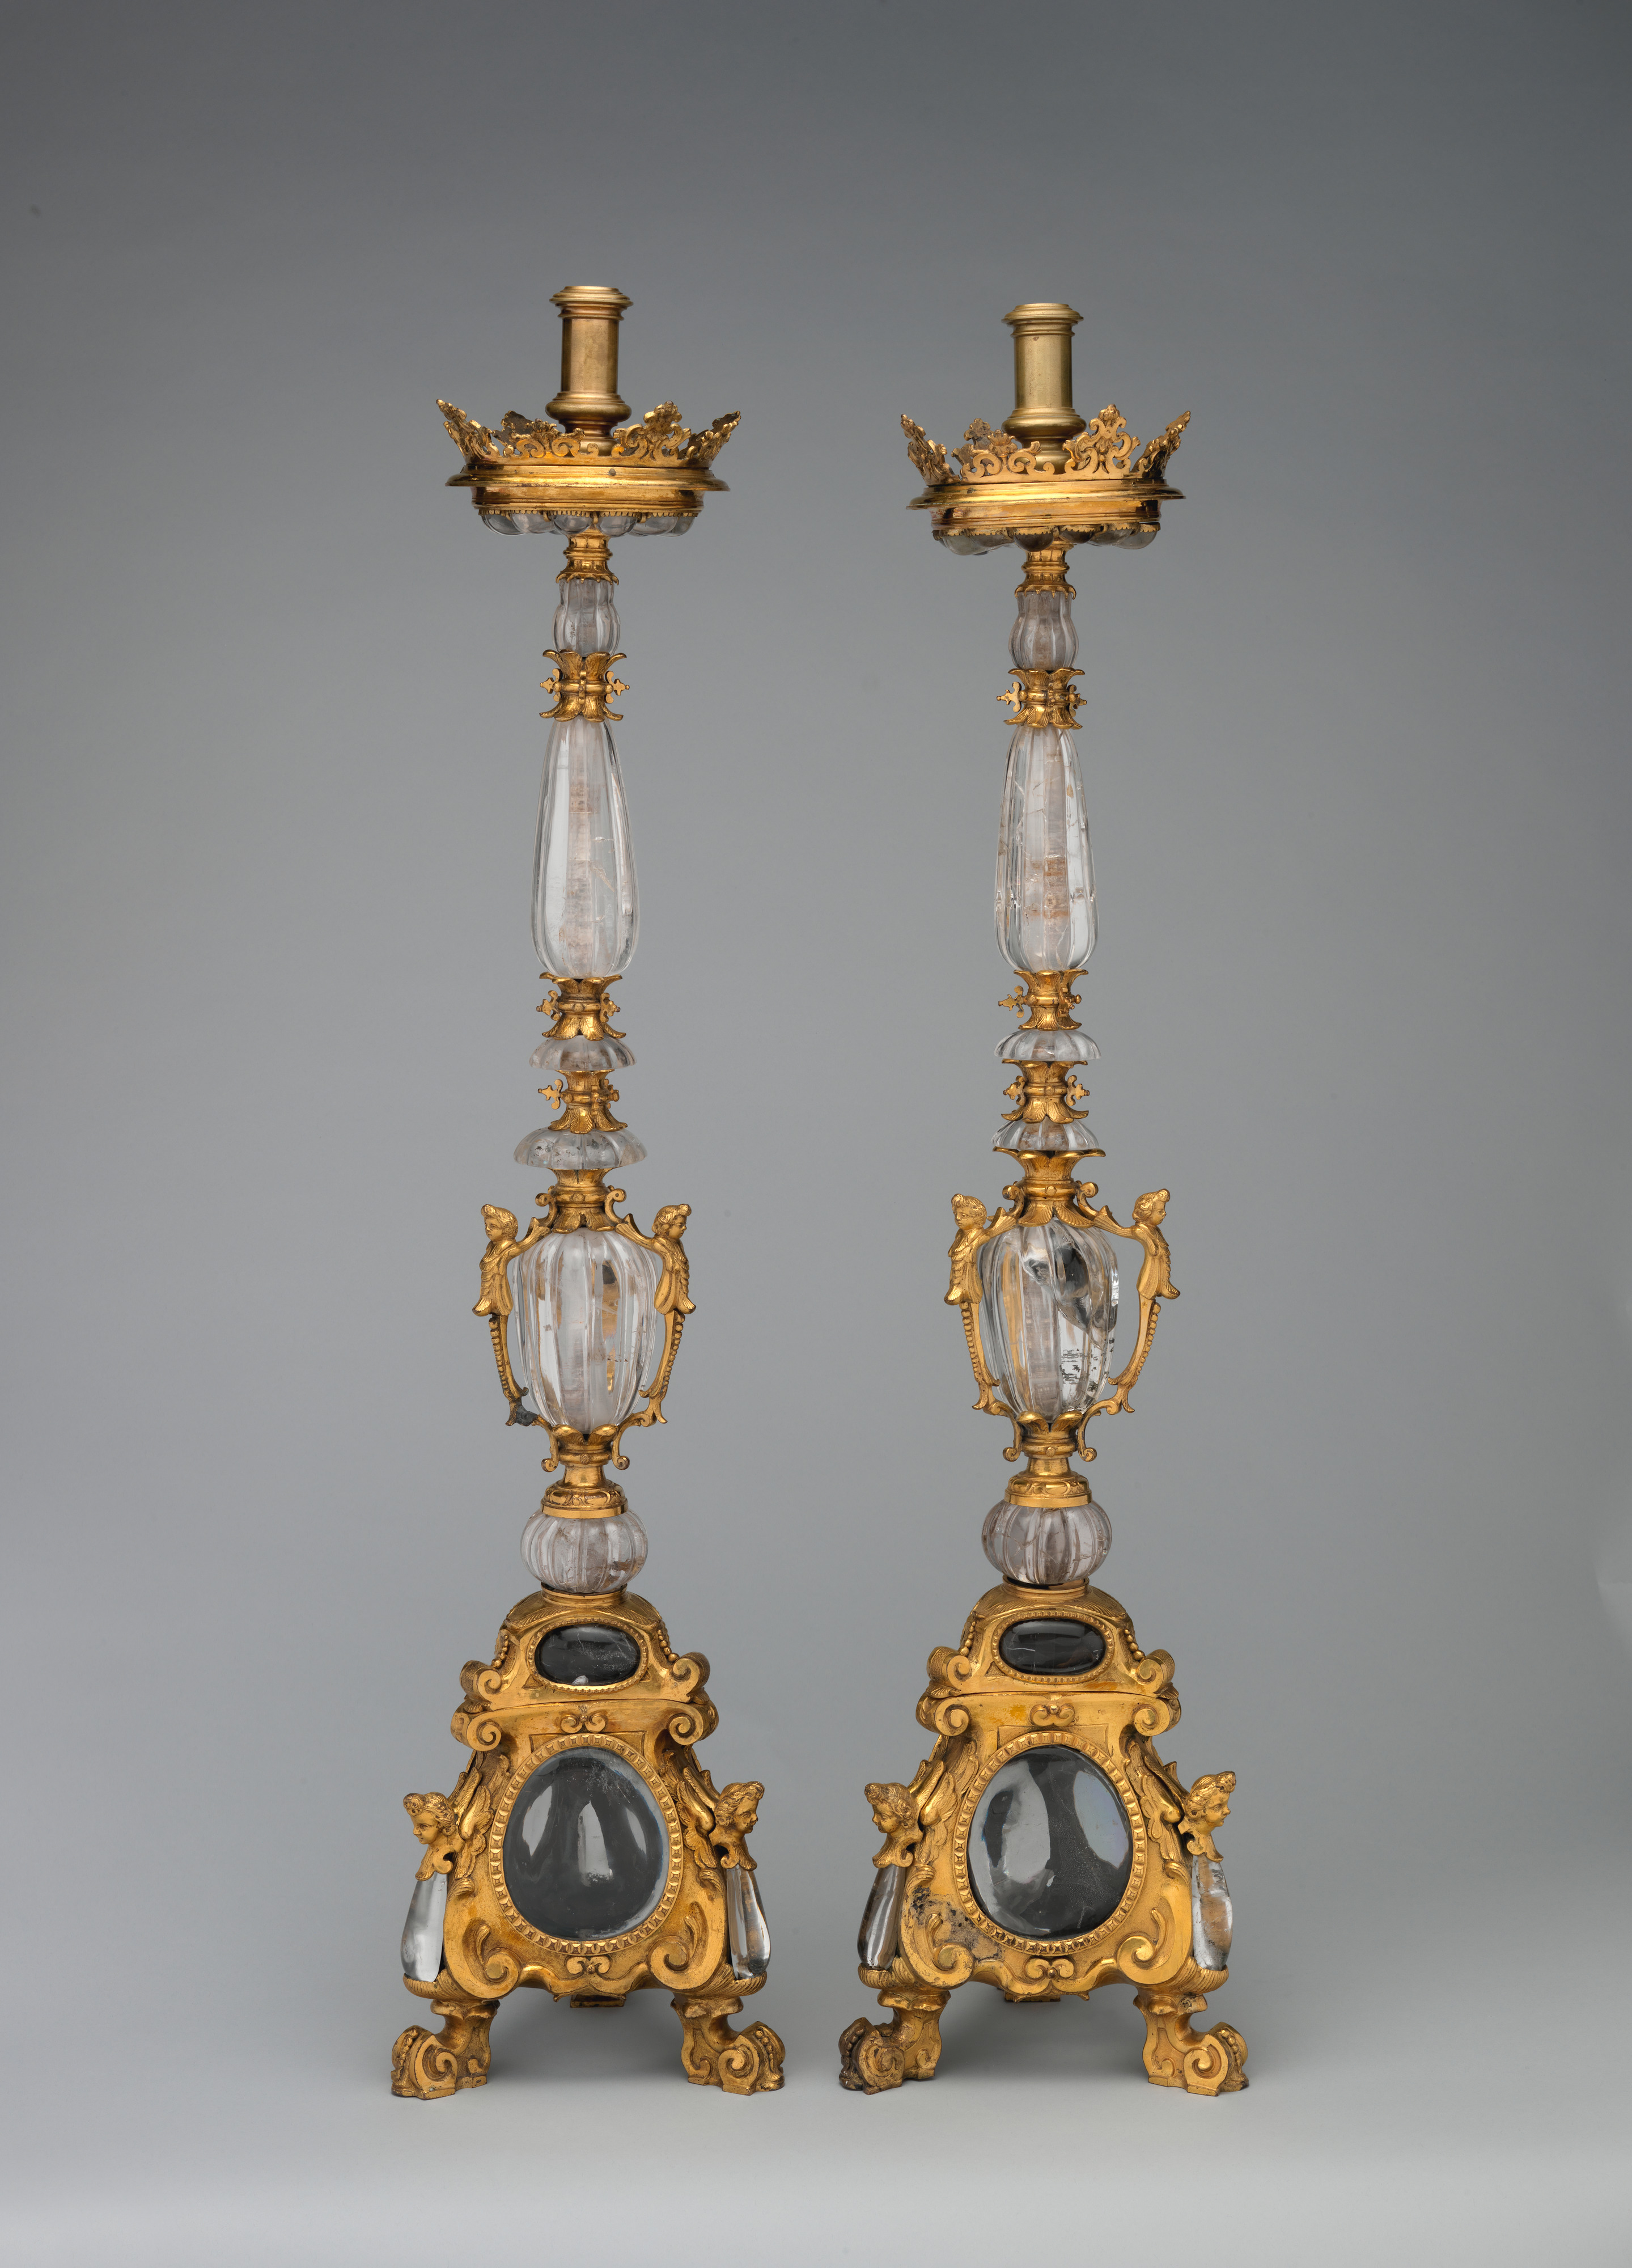 Pair of altar candlesticks, Italian, possibly Naples